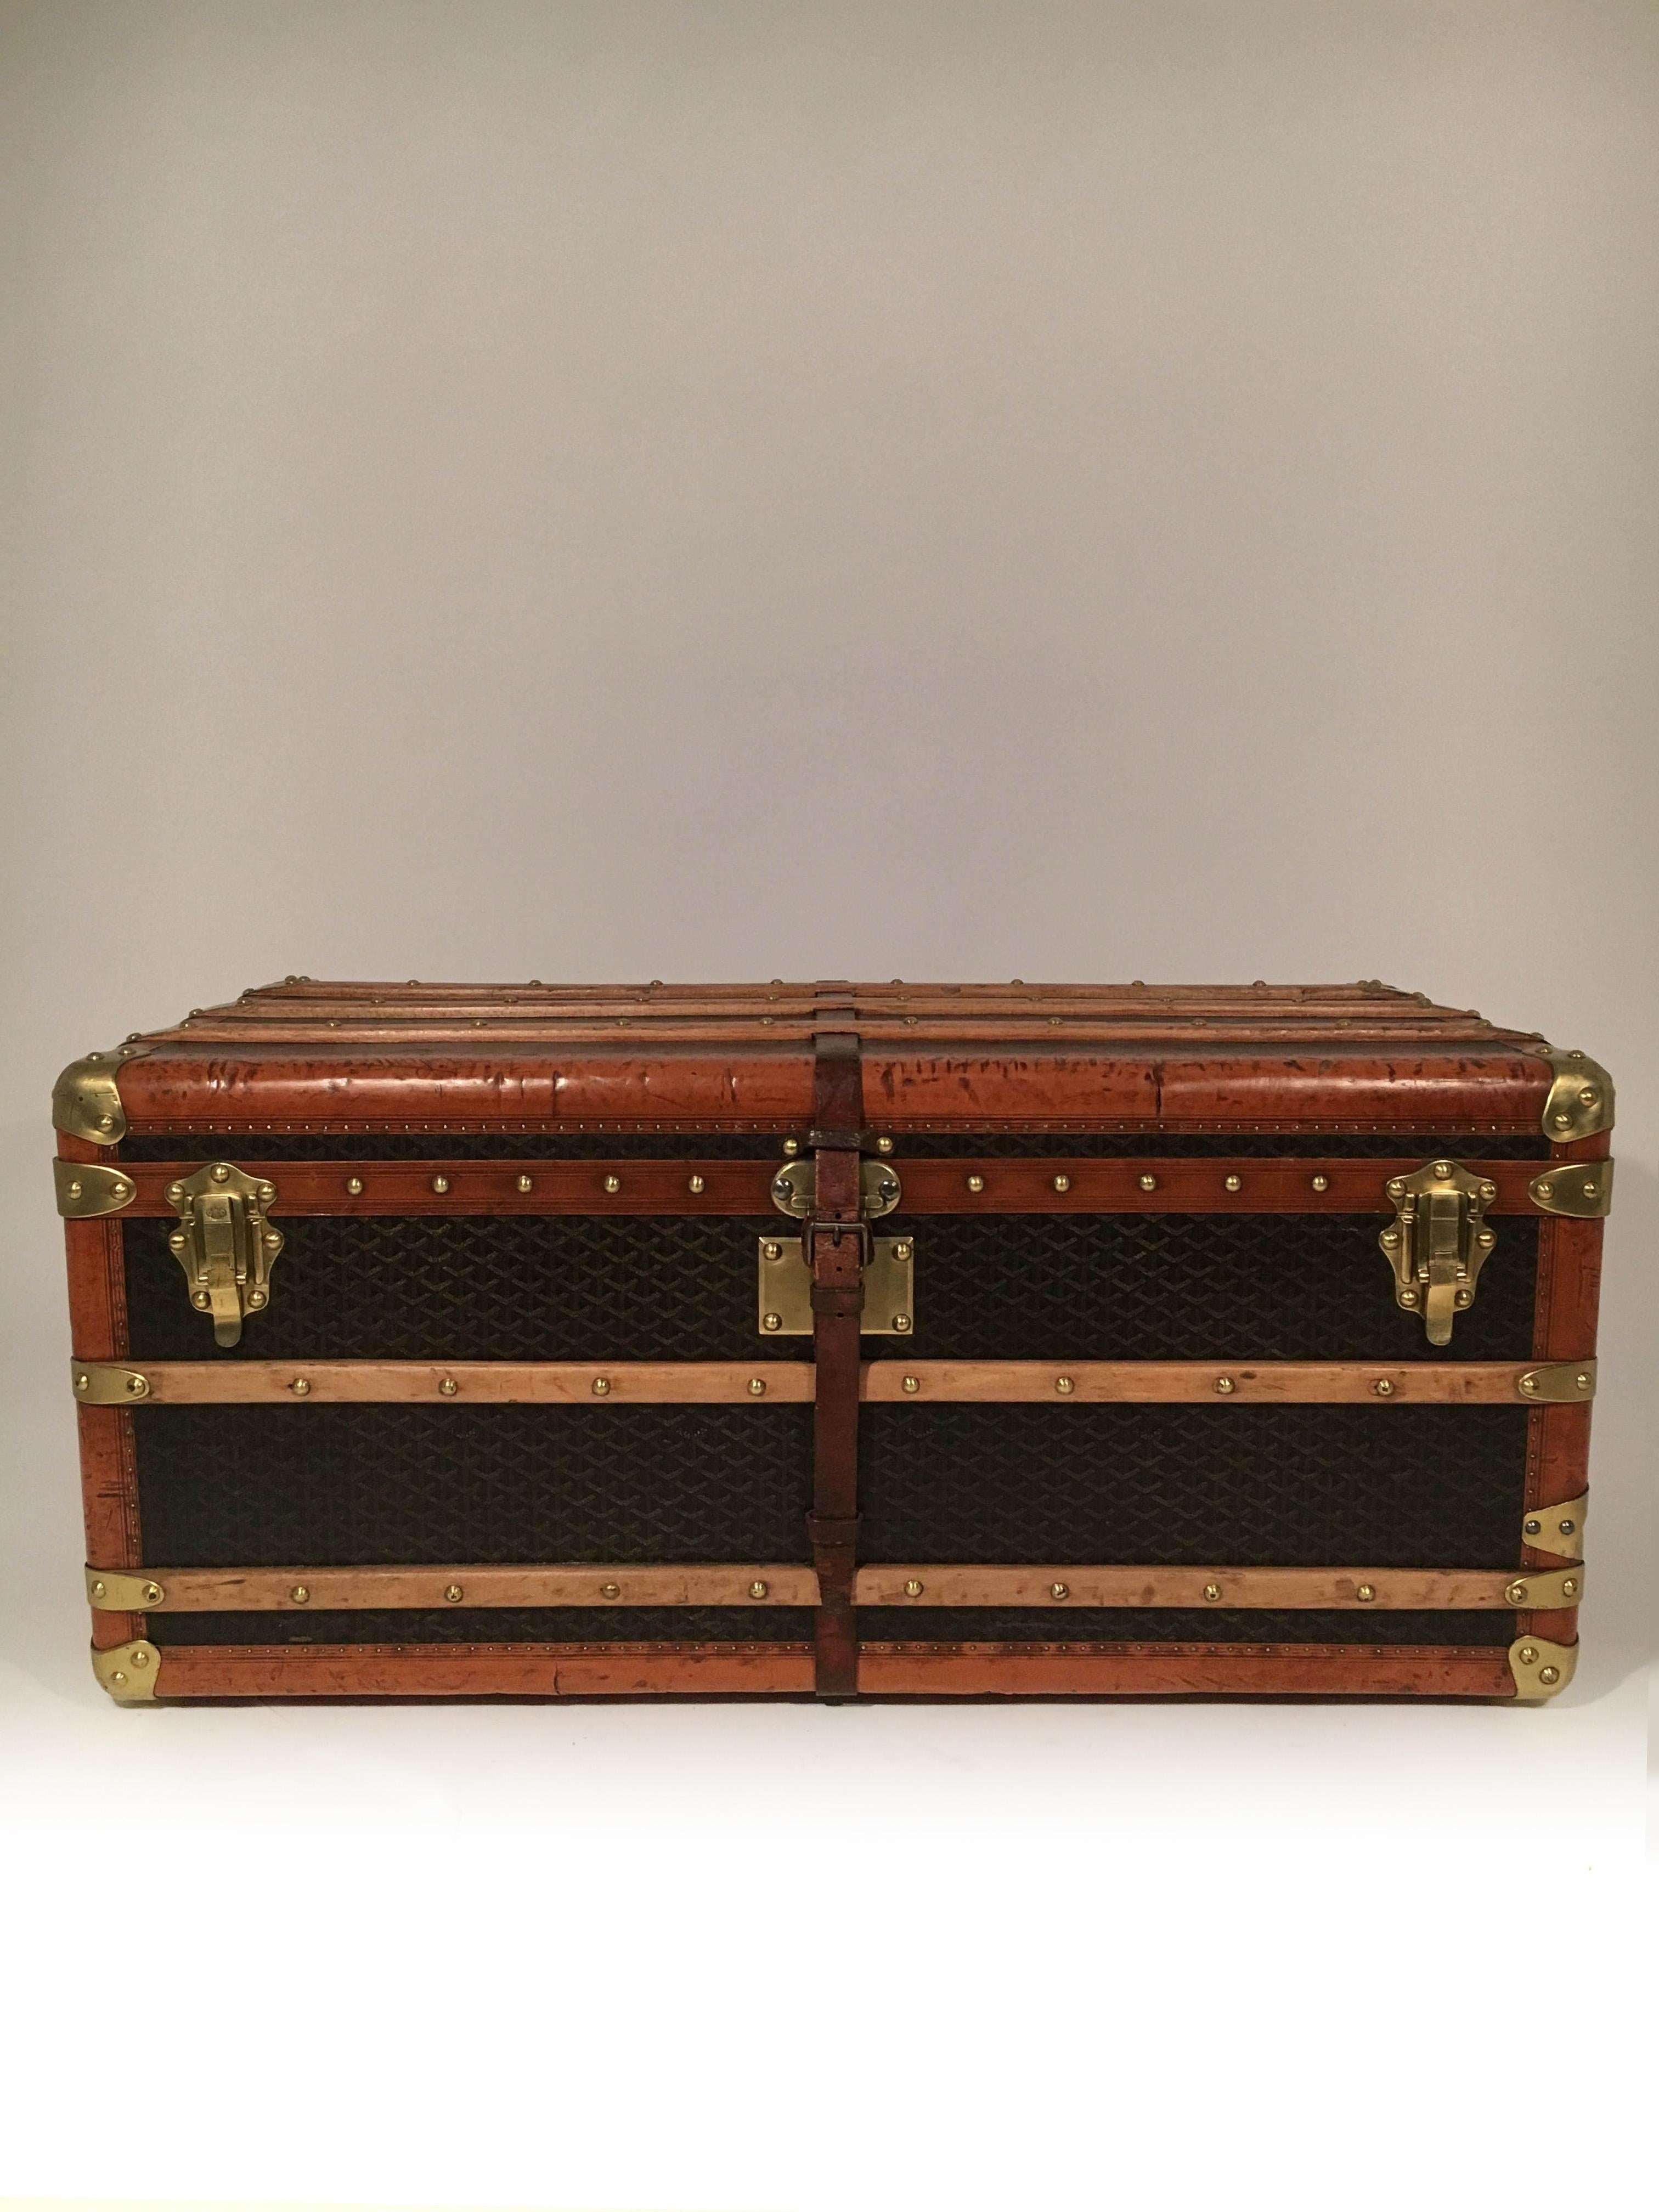 Antique Goyard Steamer Trunk from the Princely House of Thurn and Taxis, France 1910s. A splendid large size steamer trunk by Goyard with chevron pattern canvas covering, leather trim, and polished brass handles, lock & catches; circa 1909. The